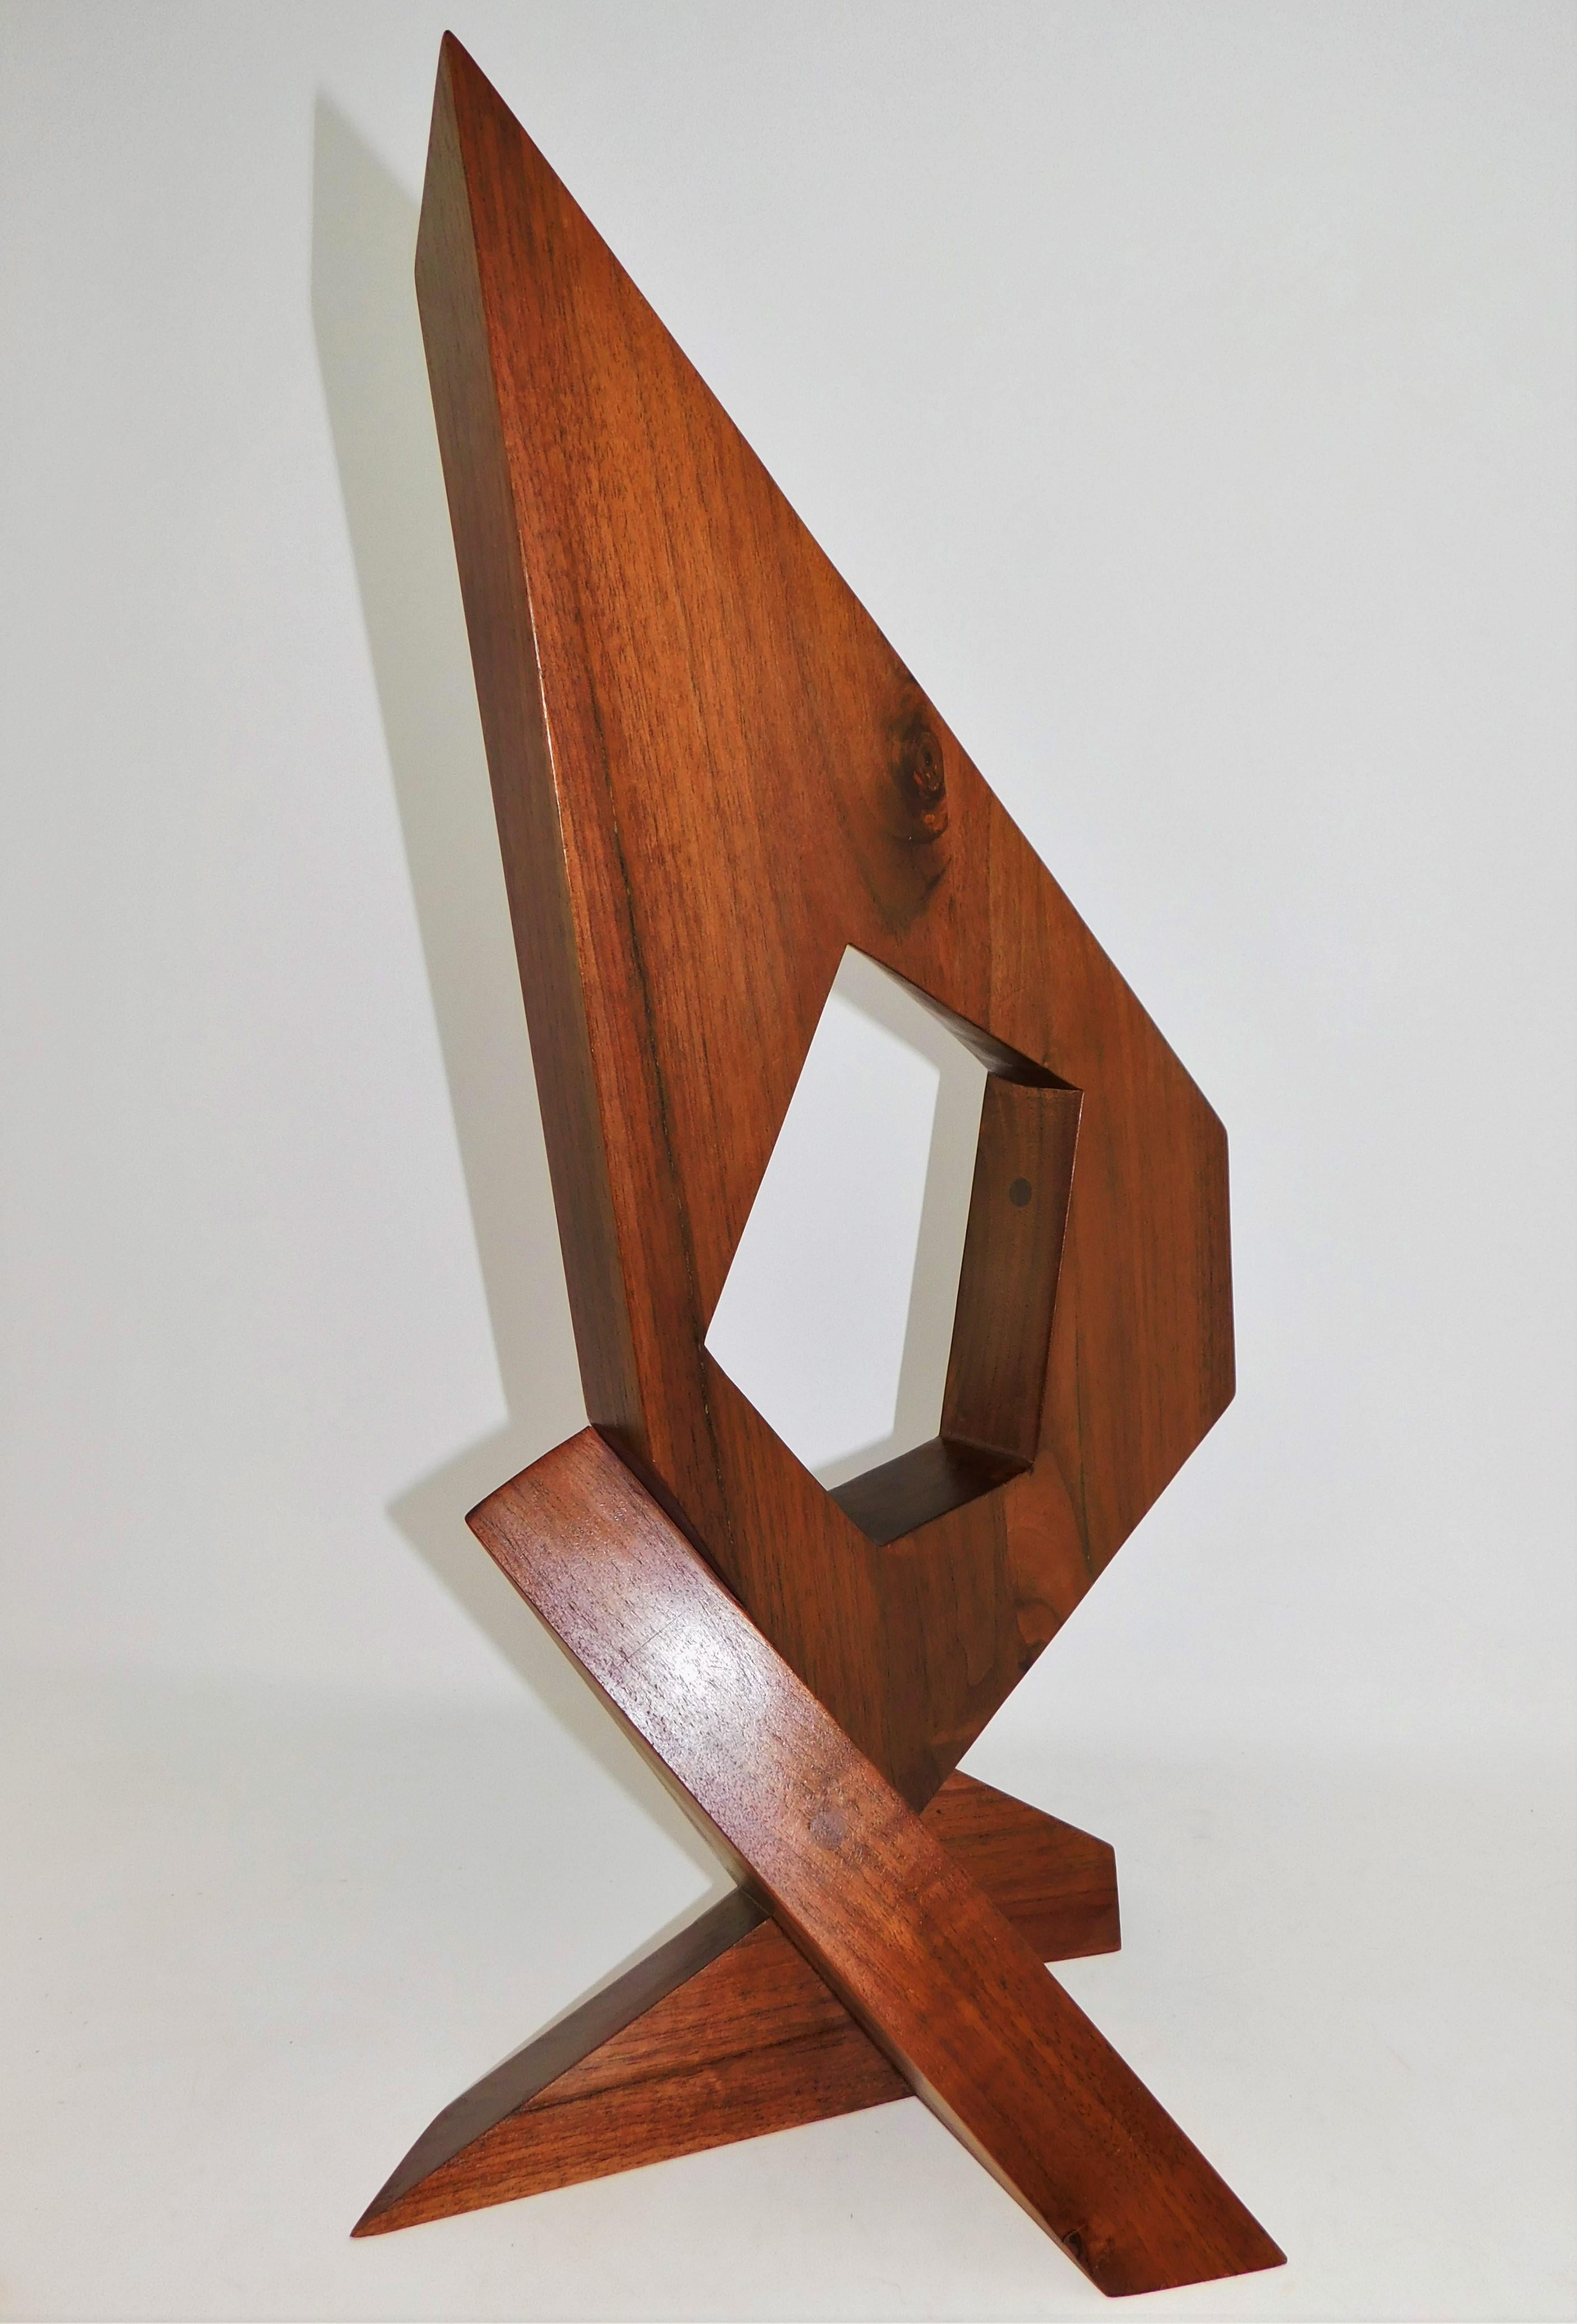 Contemporary Czeslaw Budny Large Modern Abstract Constructivist Walnut Wood Sculpture Signed